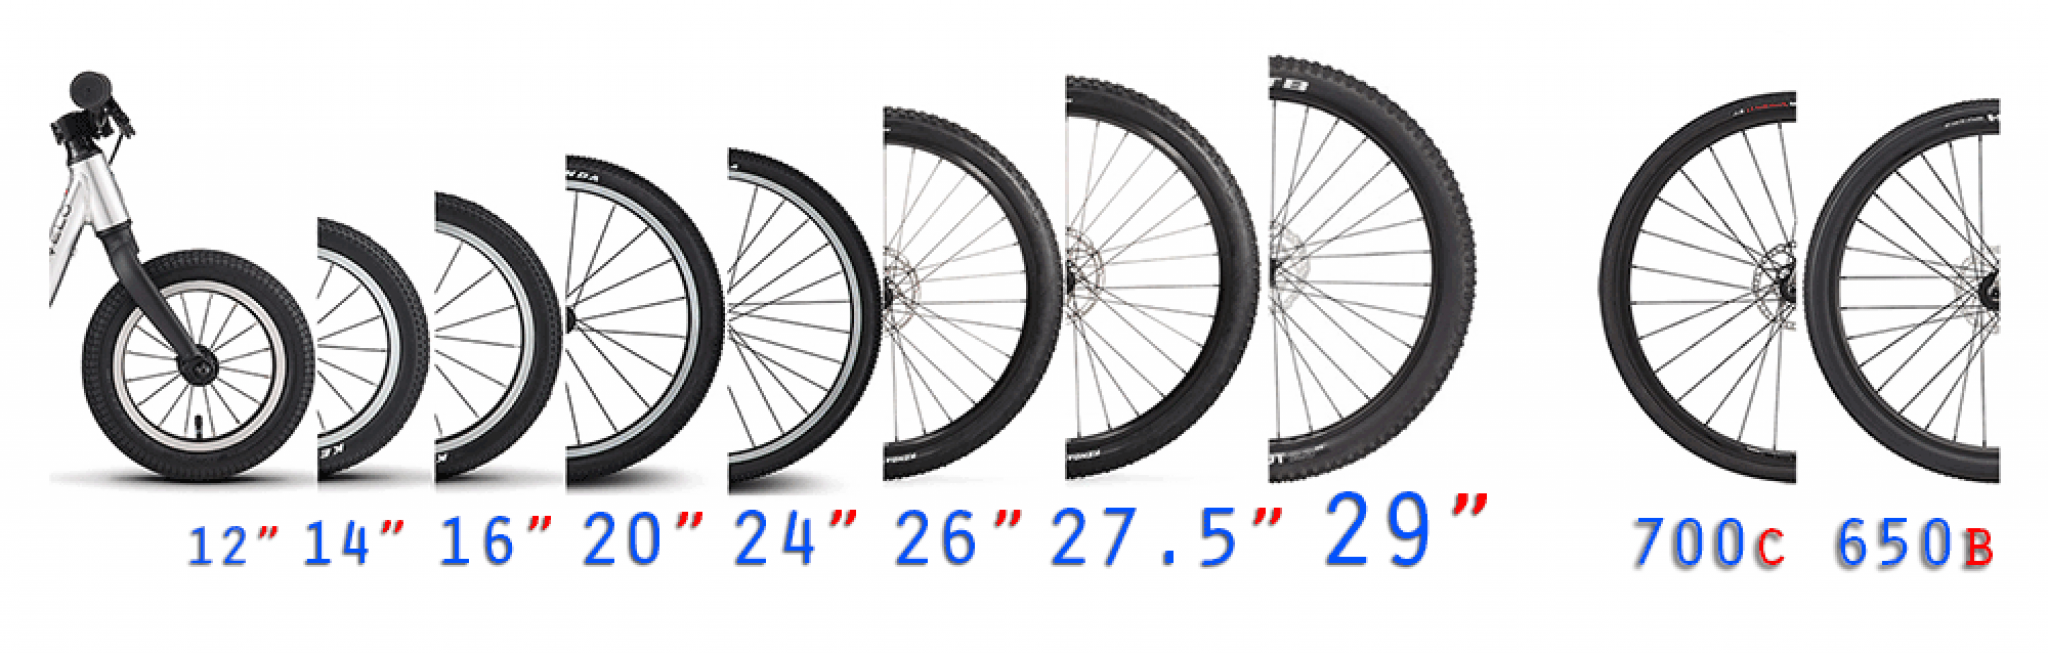 Bicycle Wheel Size Guide (12